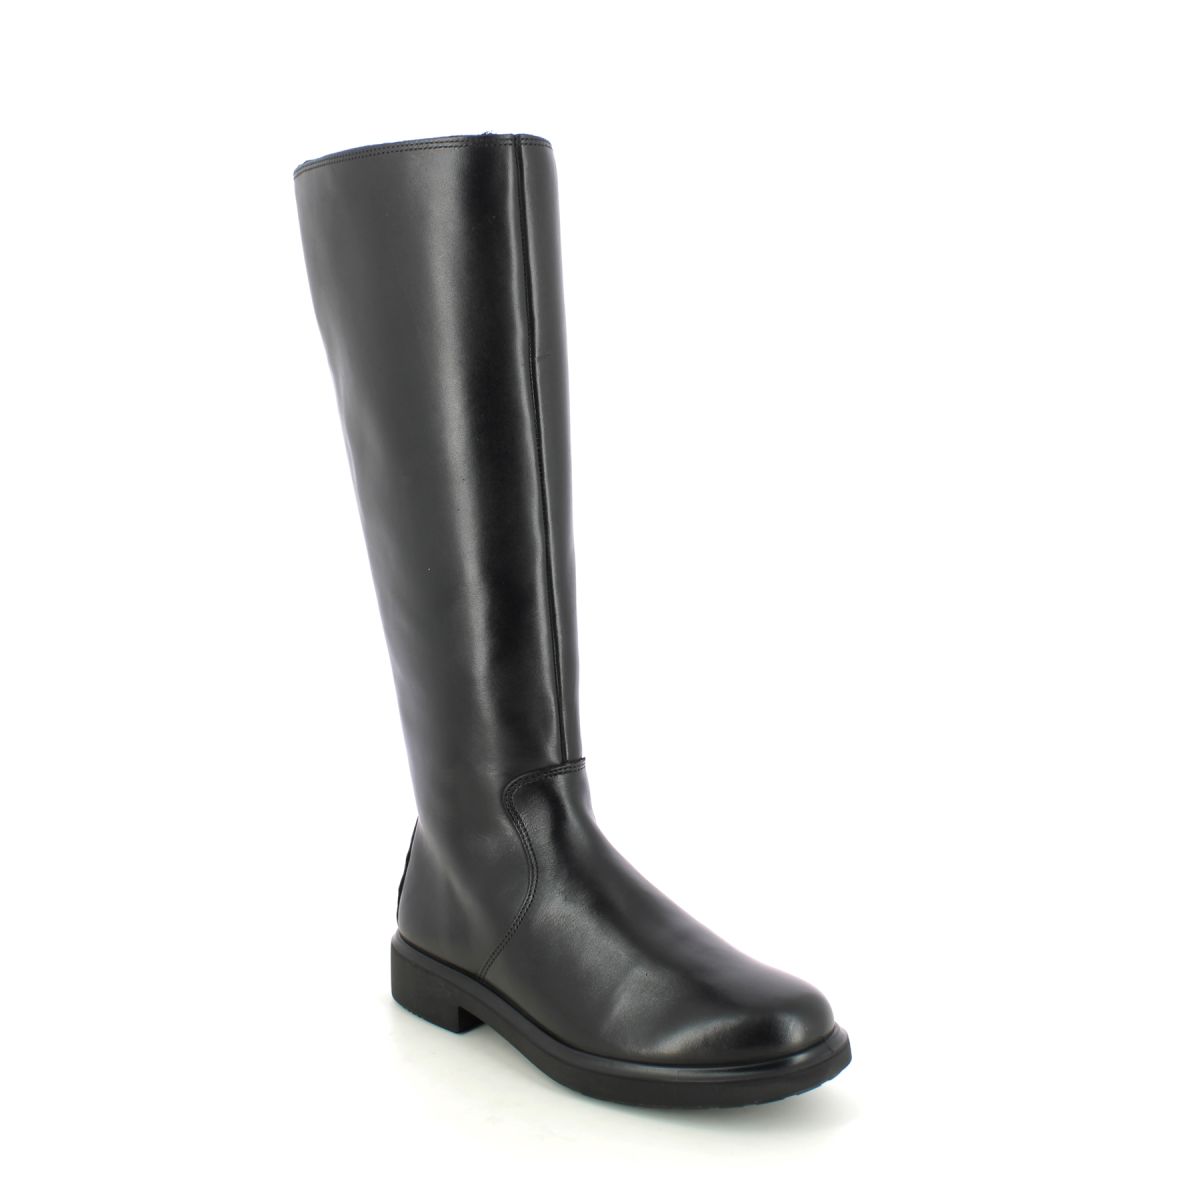 Ecco Amsterdam Metropole Tex Black Leather Womens Knee-High Boots 222023-01001 In Size 39 In Plain Black Leather